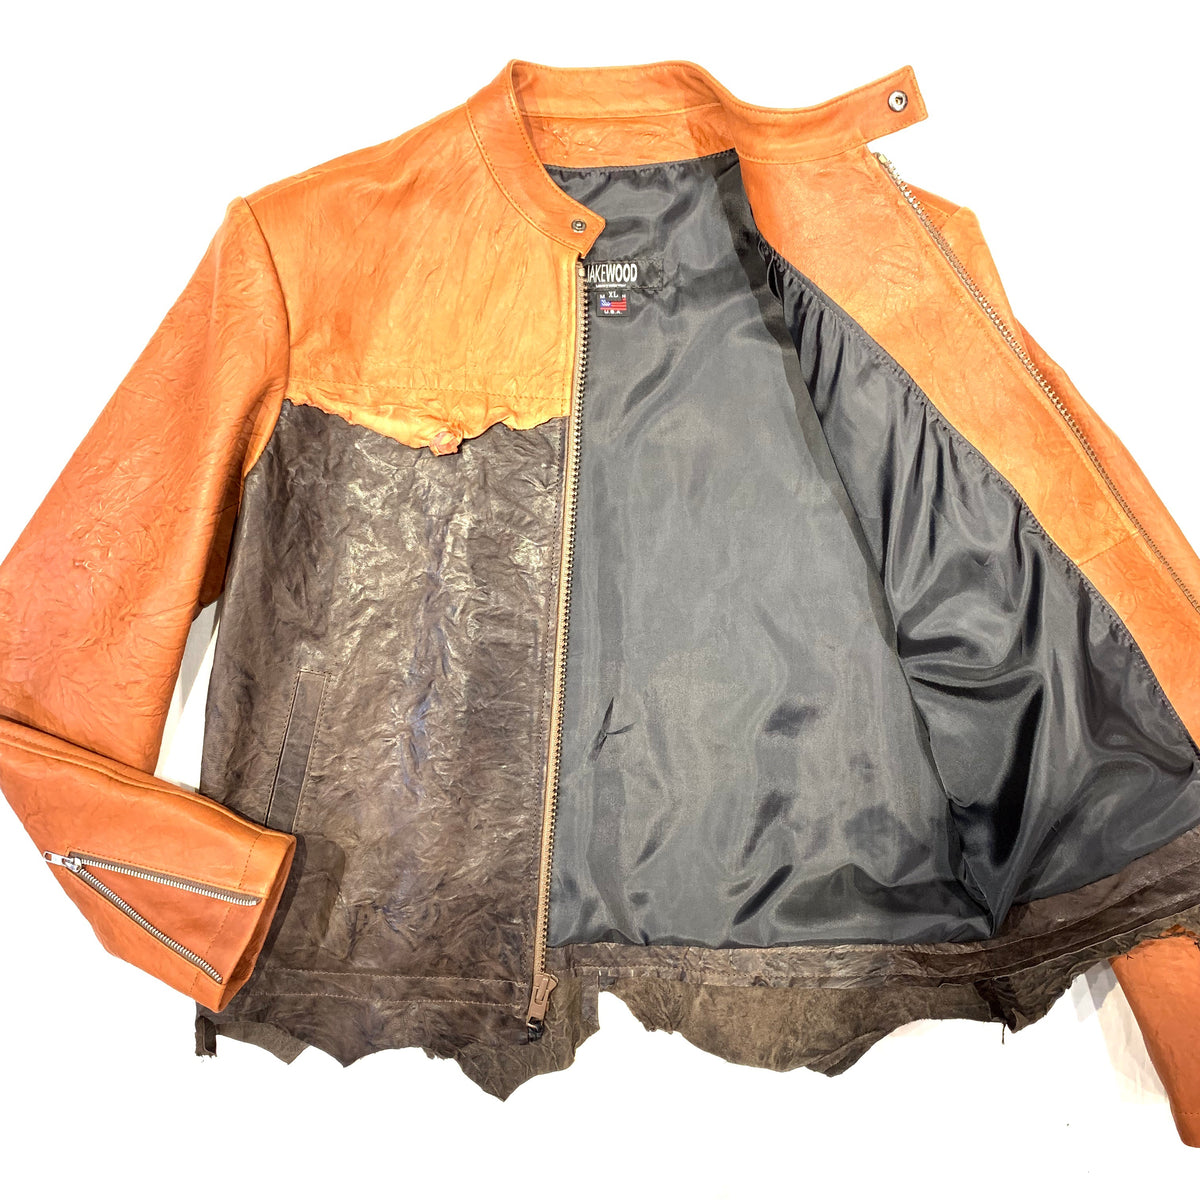 Kashani Brown Two Tone Raw Cut Lambskin Leather Jacket - Dudes Boutique